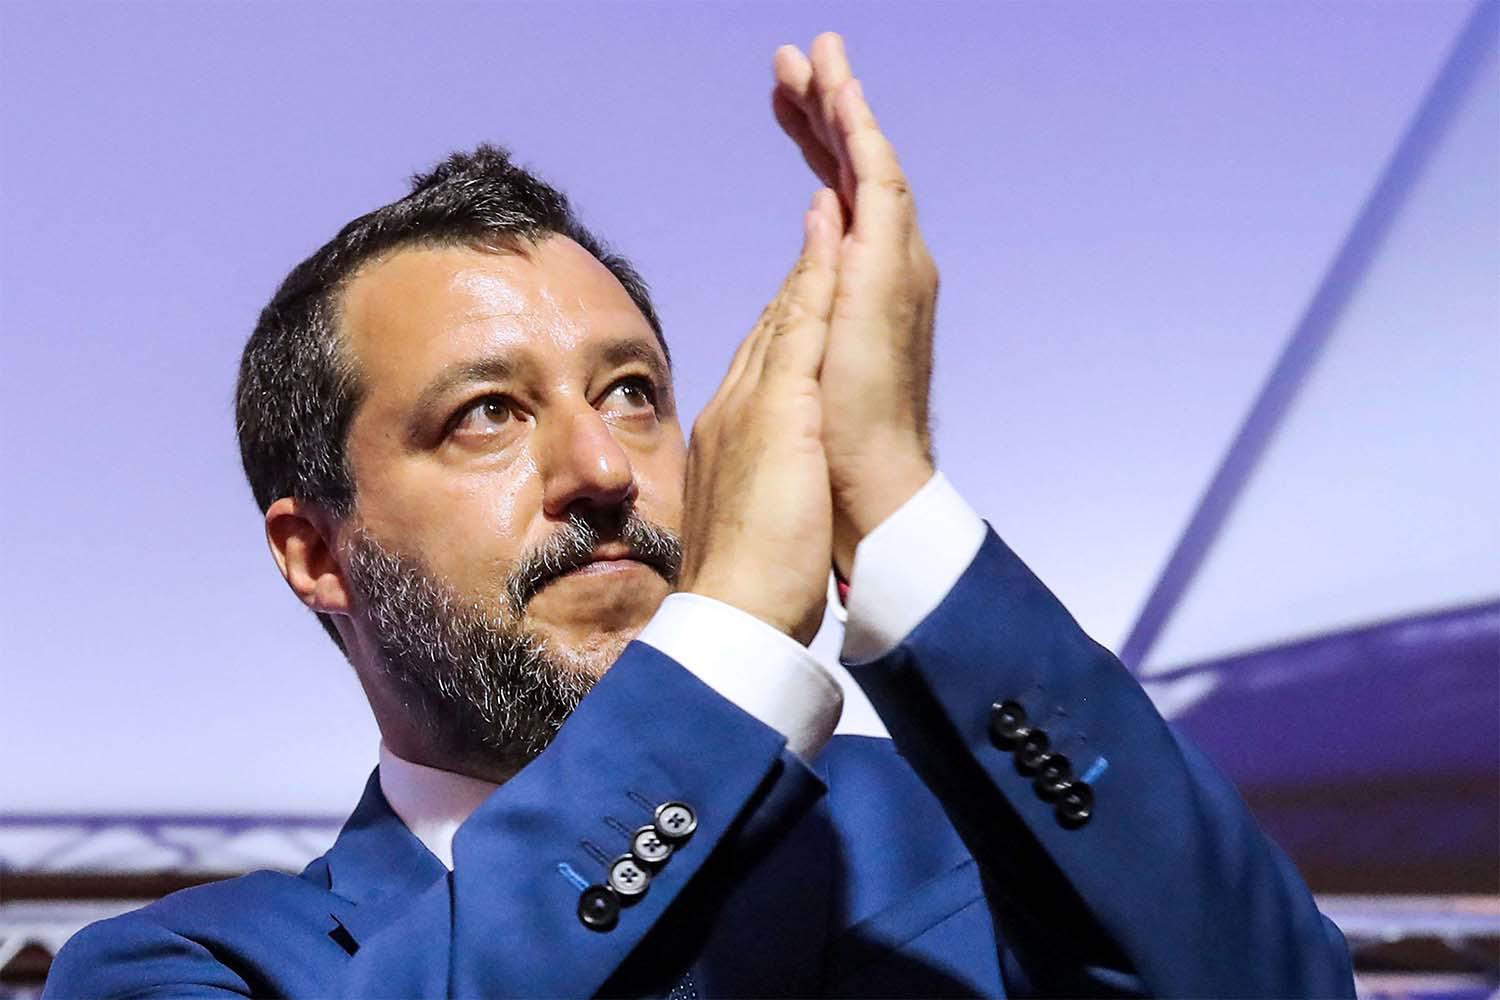 Head of Italy’s League party and former Deputy Prime Minister Matteo Salvini